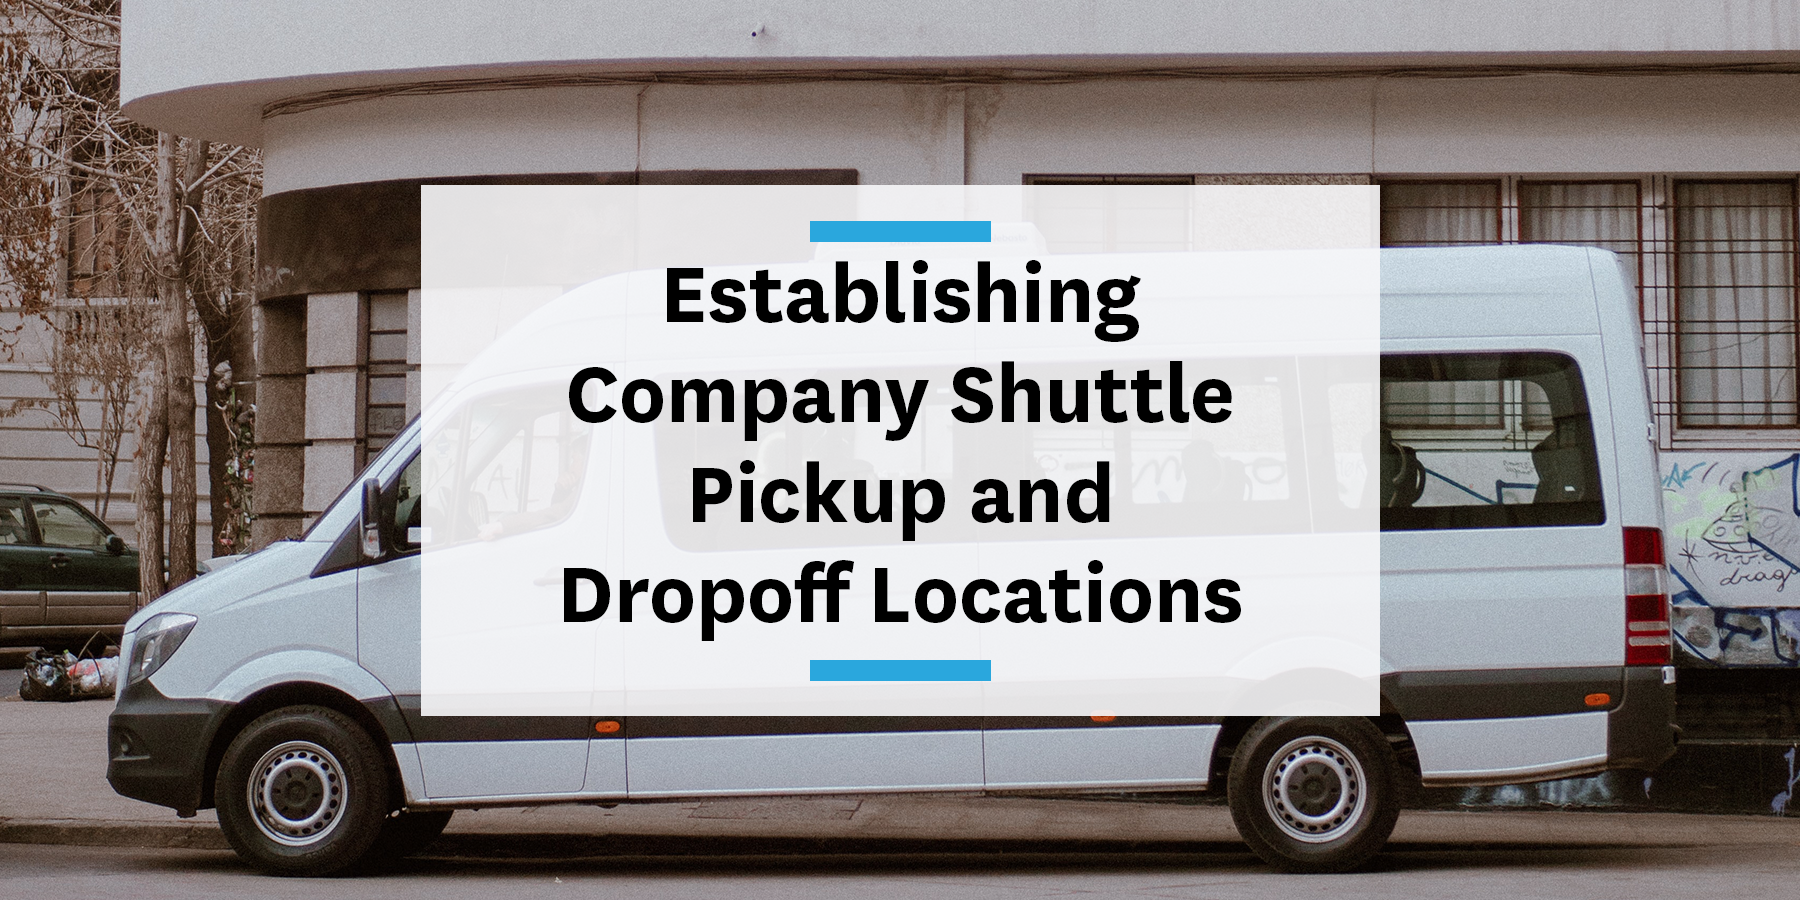 Feature image for establishing pickup and dropoff locations for your company shuttle